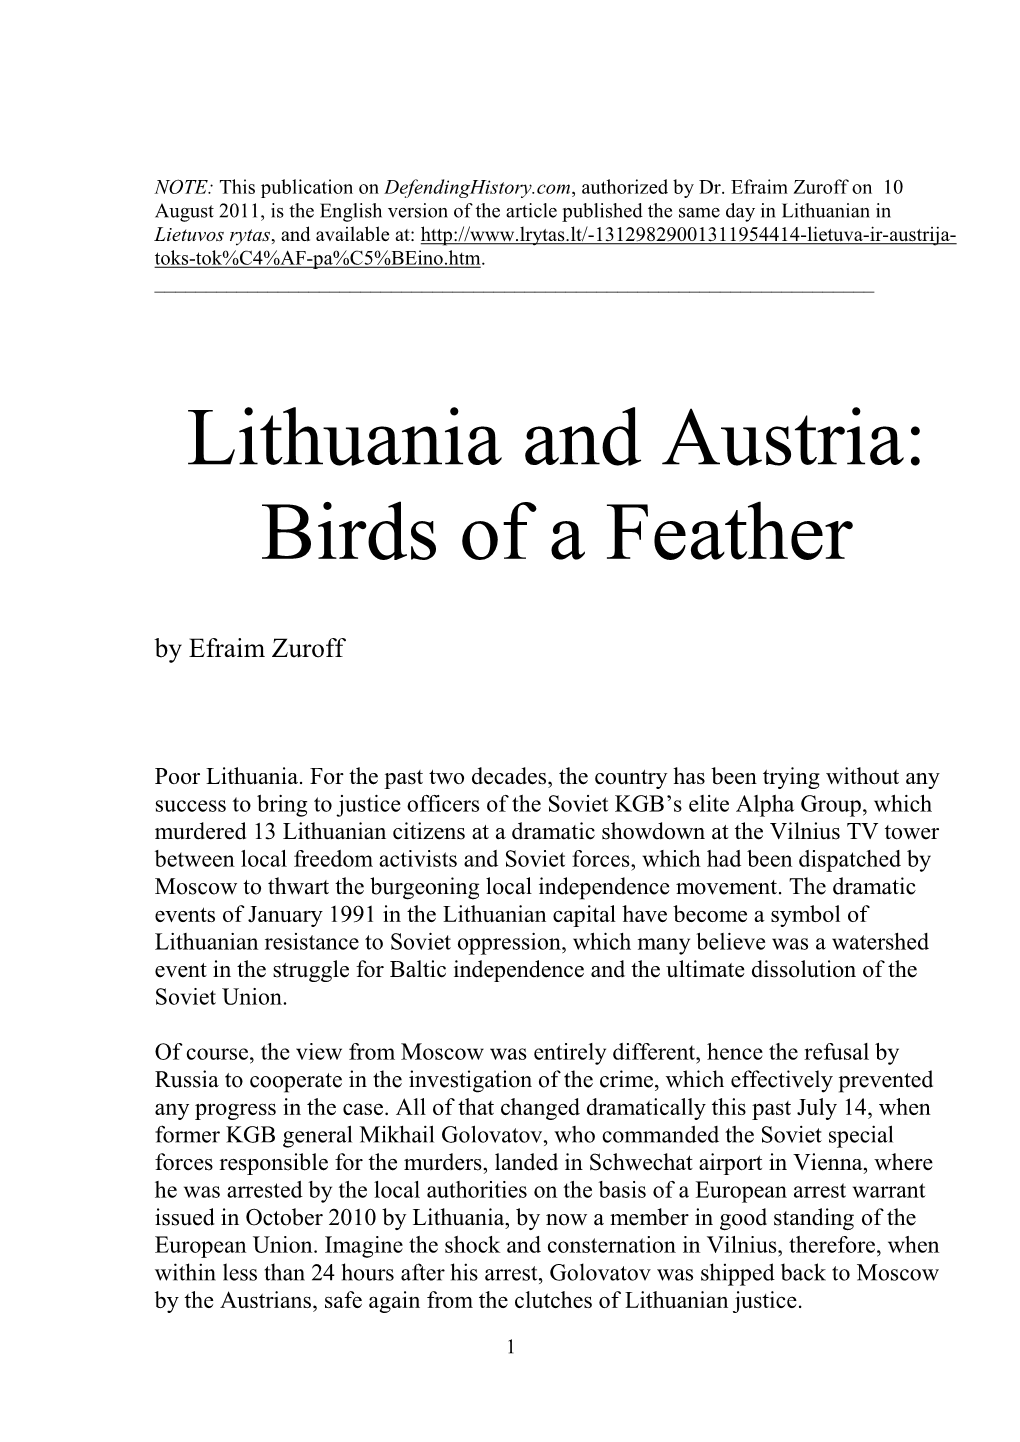 Lithuania and Austria: Birds of a Feather